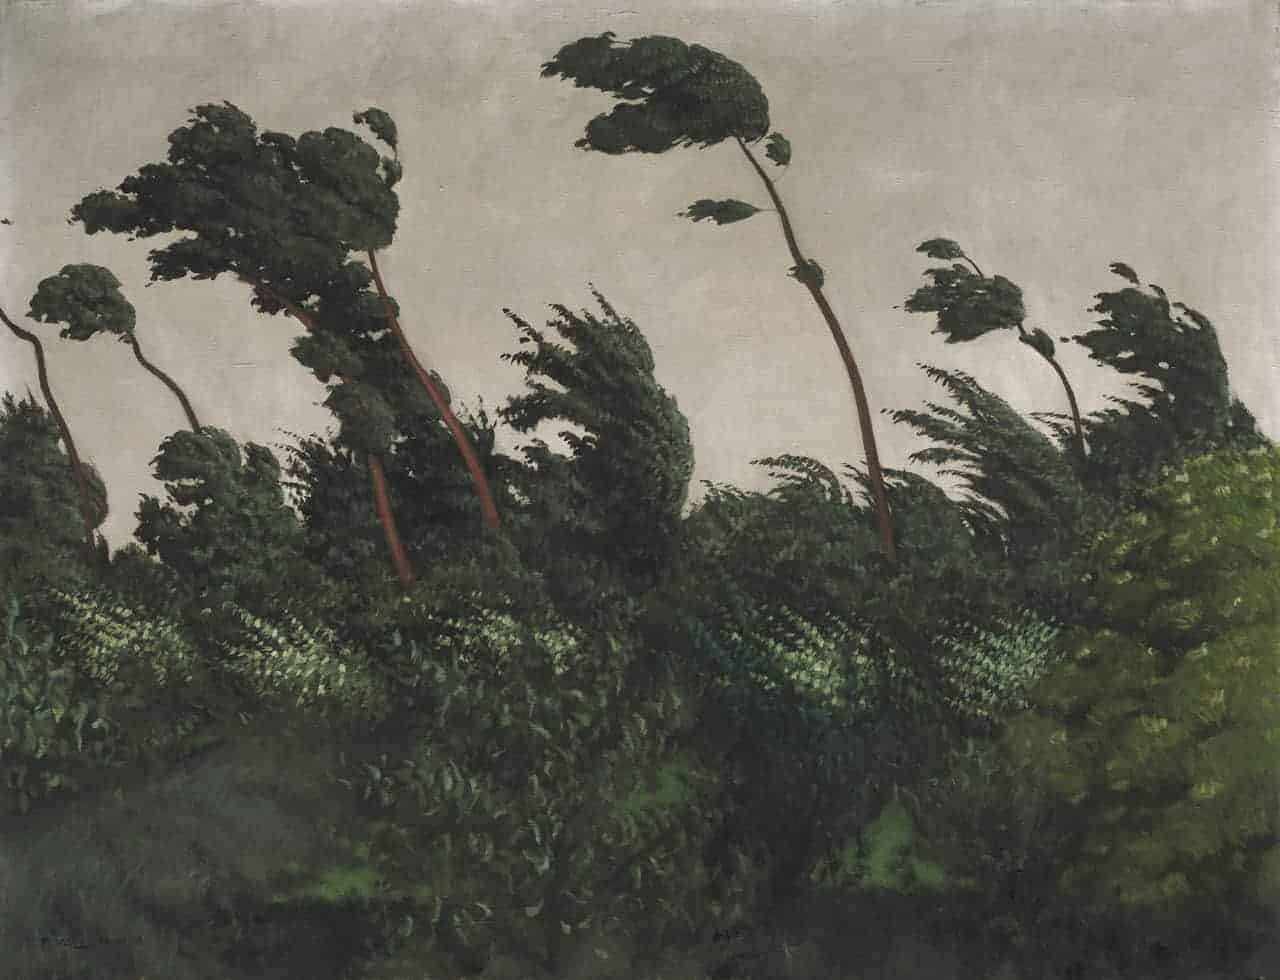 Félix Vallotton, The Wind, 1910, Courtesy National Gallery of Art, Washington (article on anxiety)